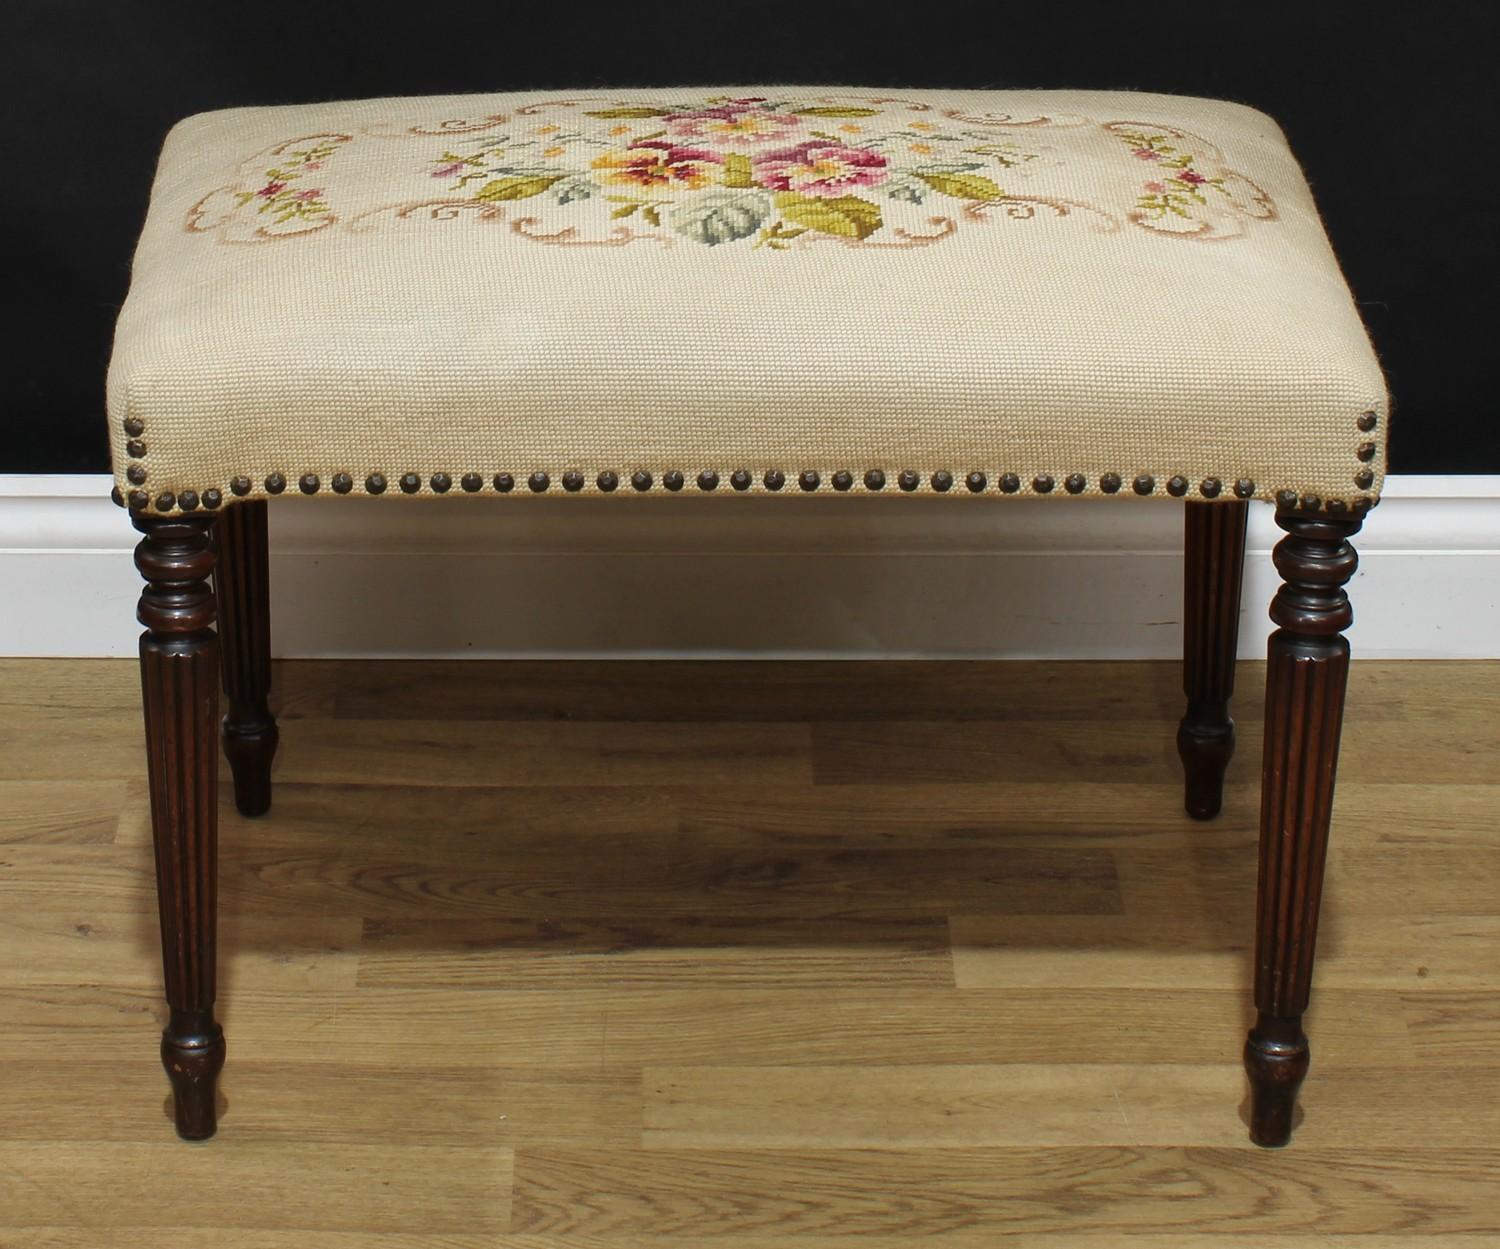 A George III Revival mahogany stool or window seat, rectangular top, turned and fluted legs, 44cm